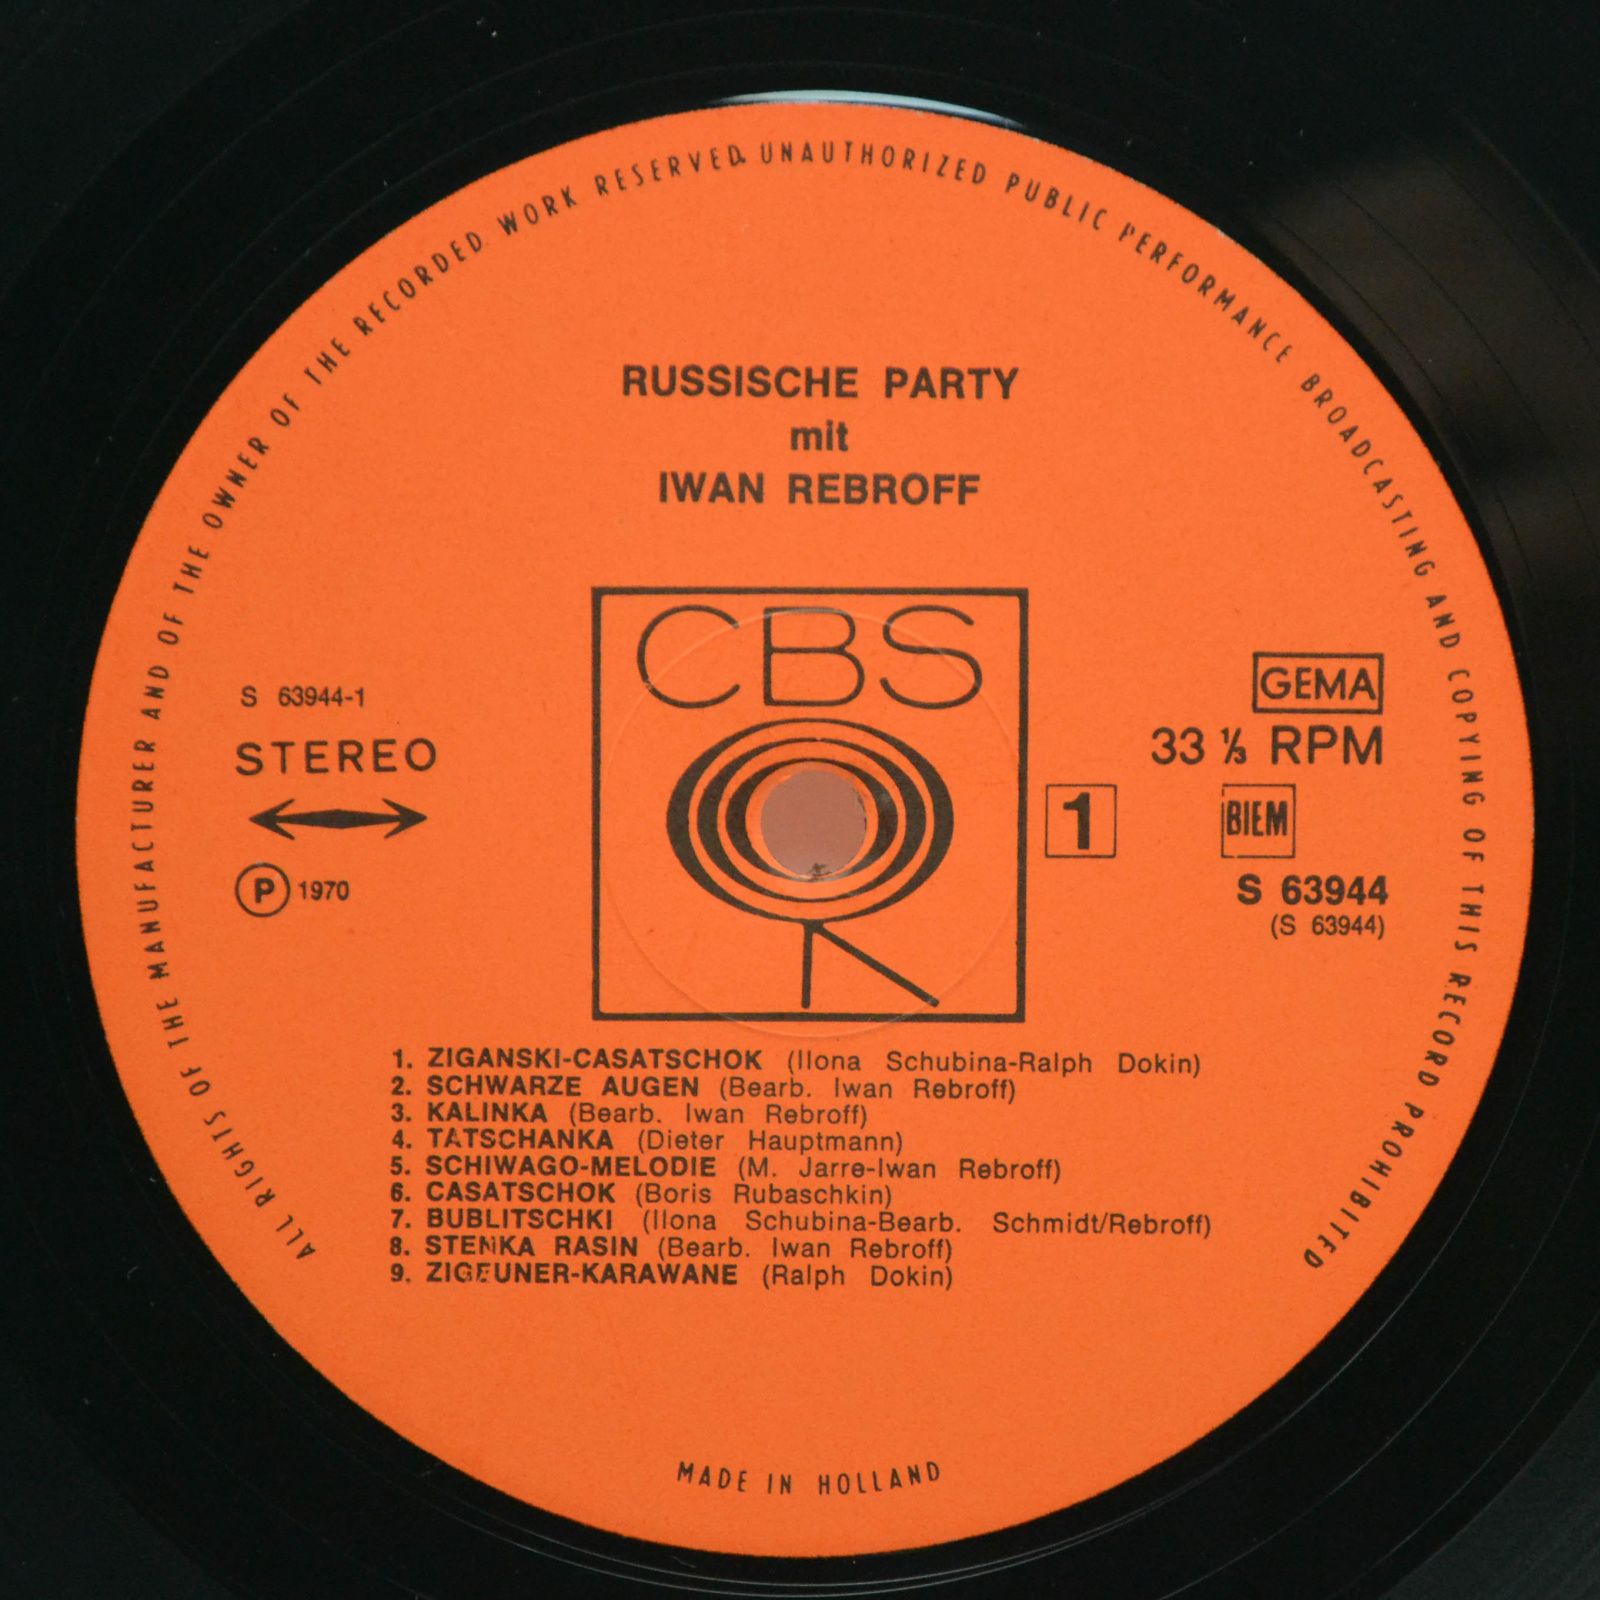 Iwan Rebroff — Russische Party, 1970